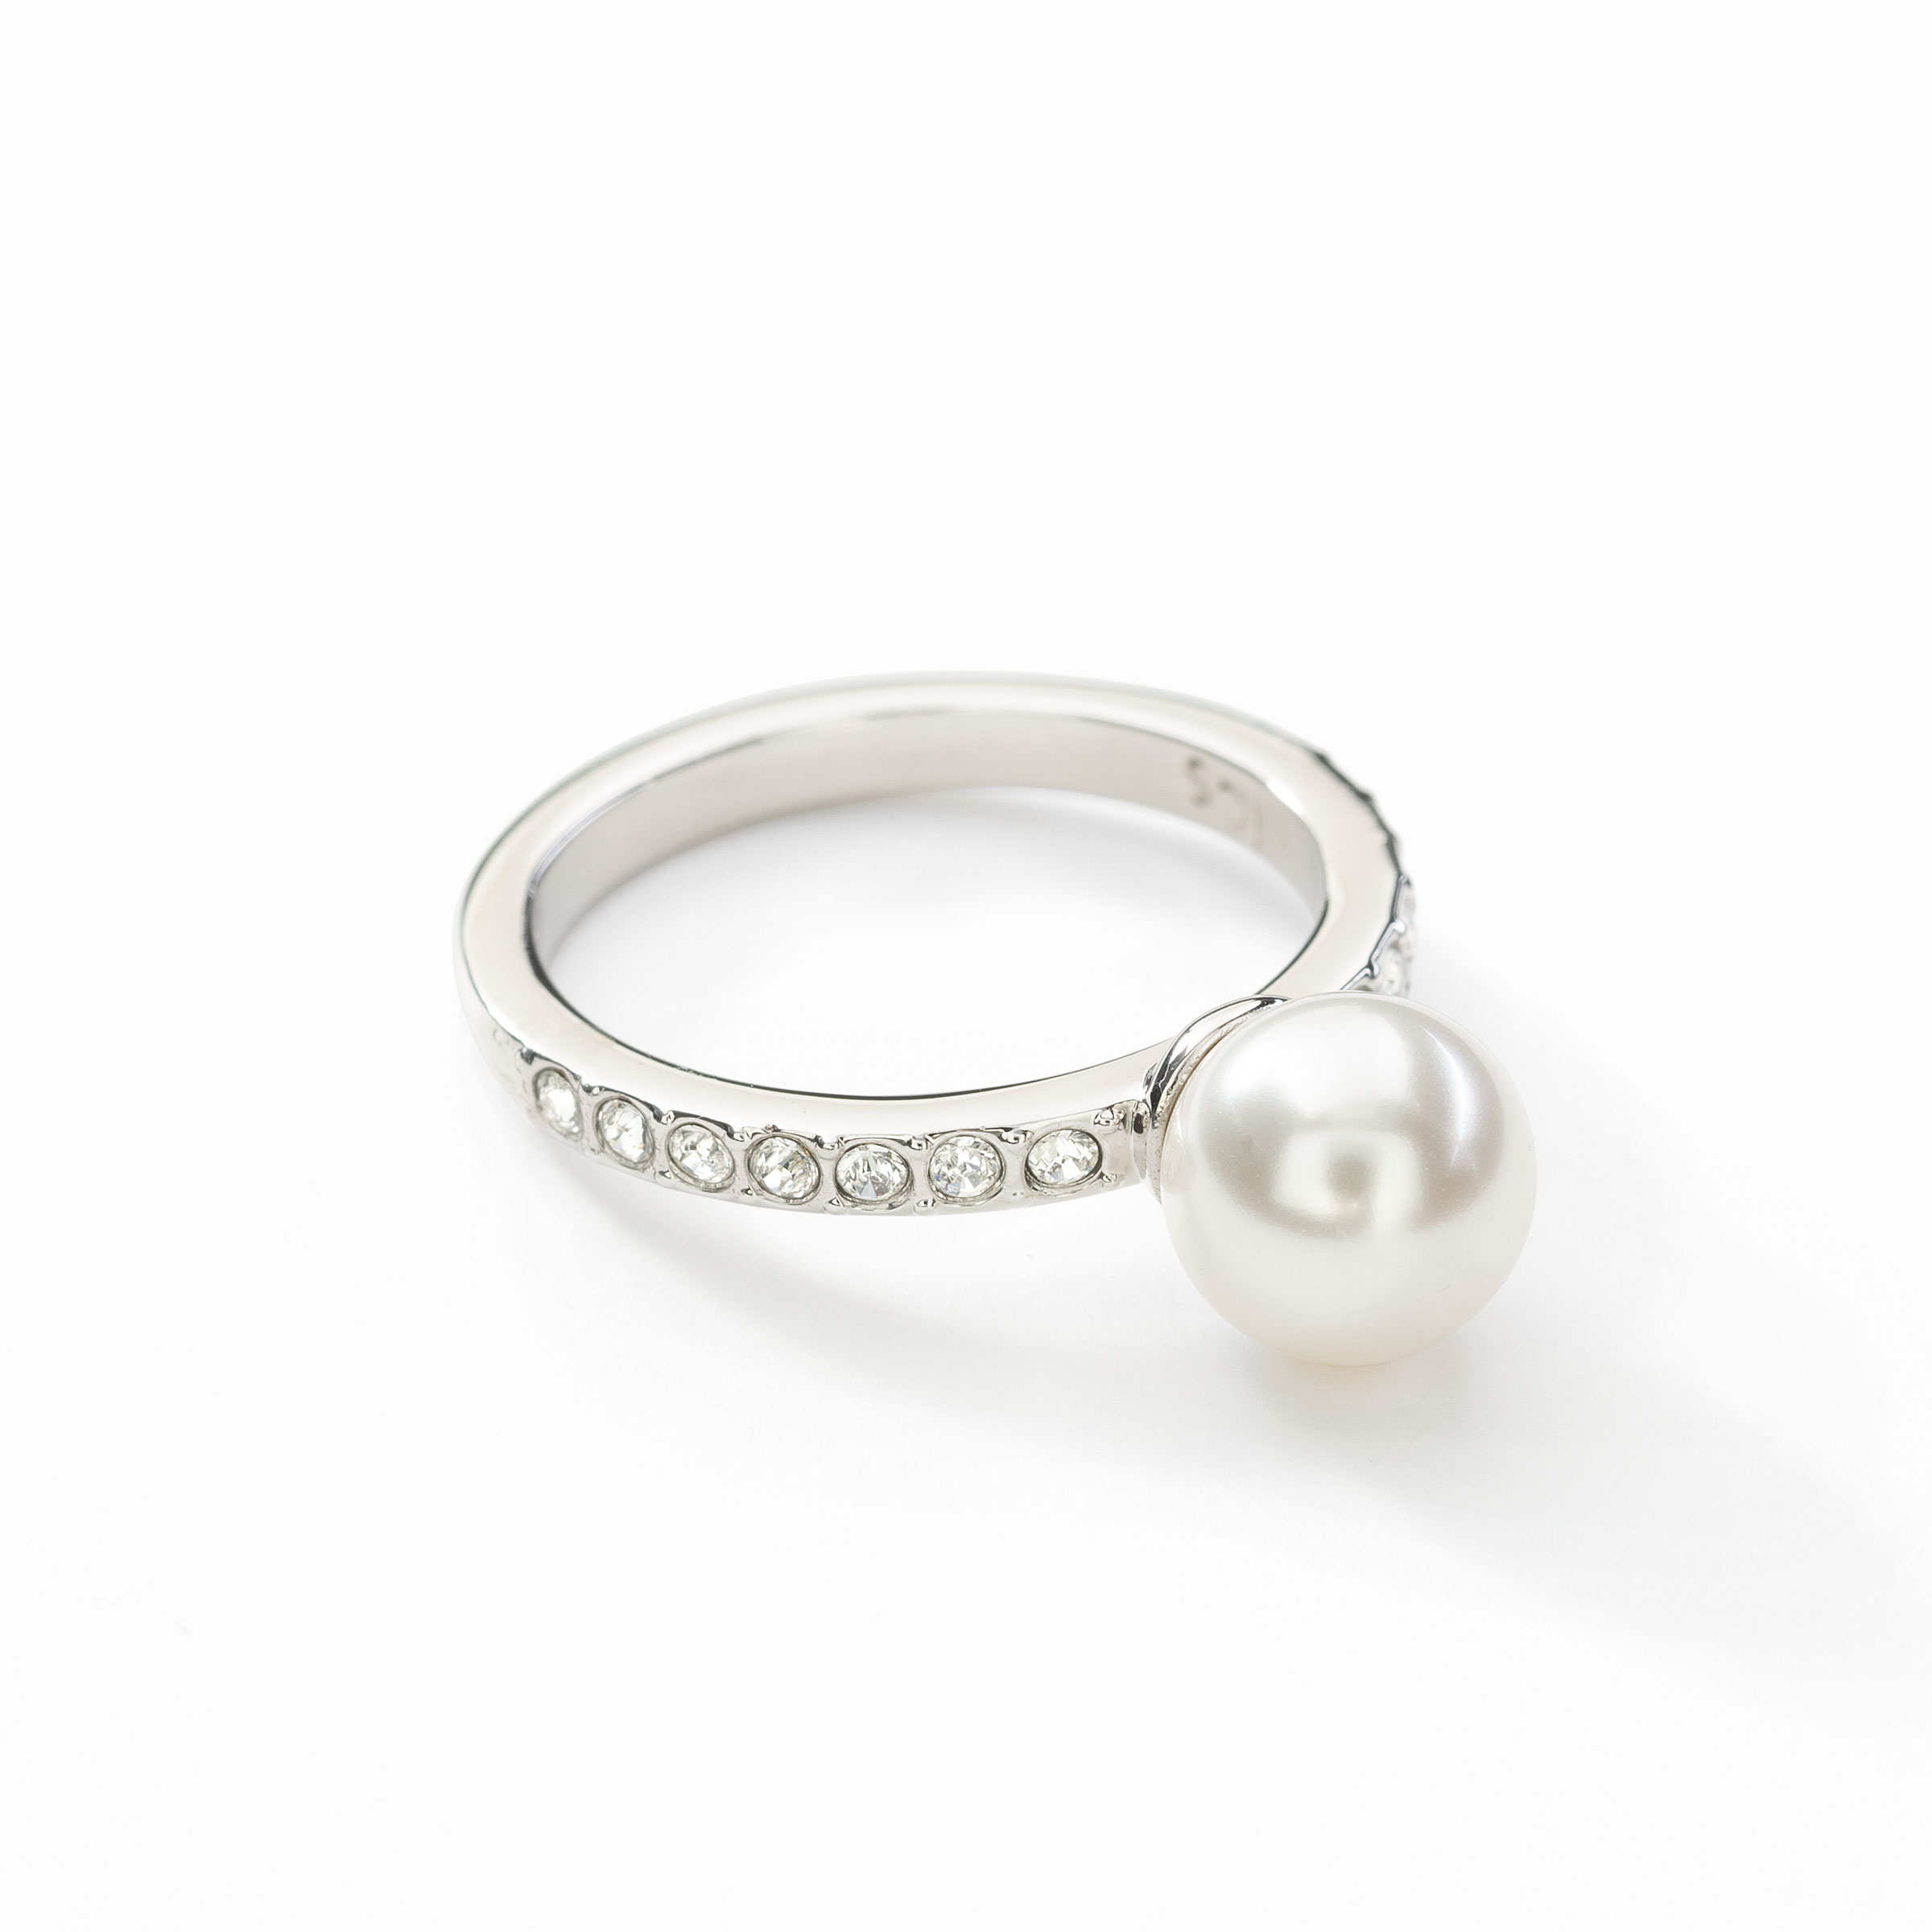 Luster Ring - now $35